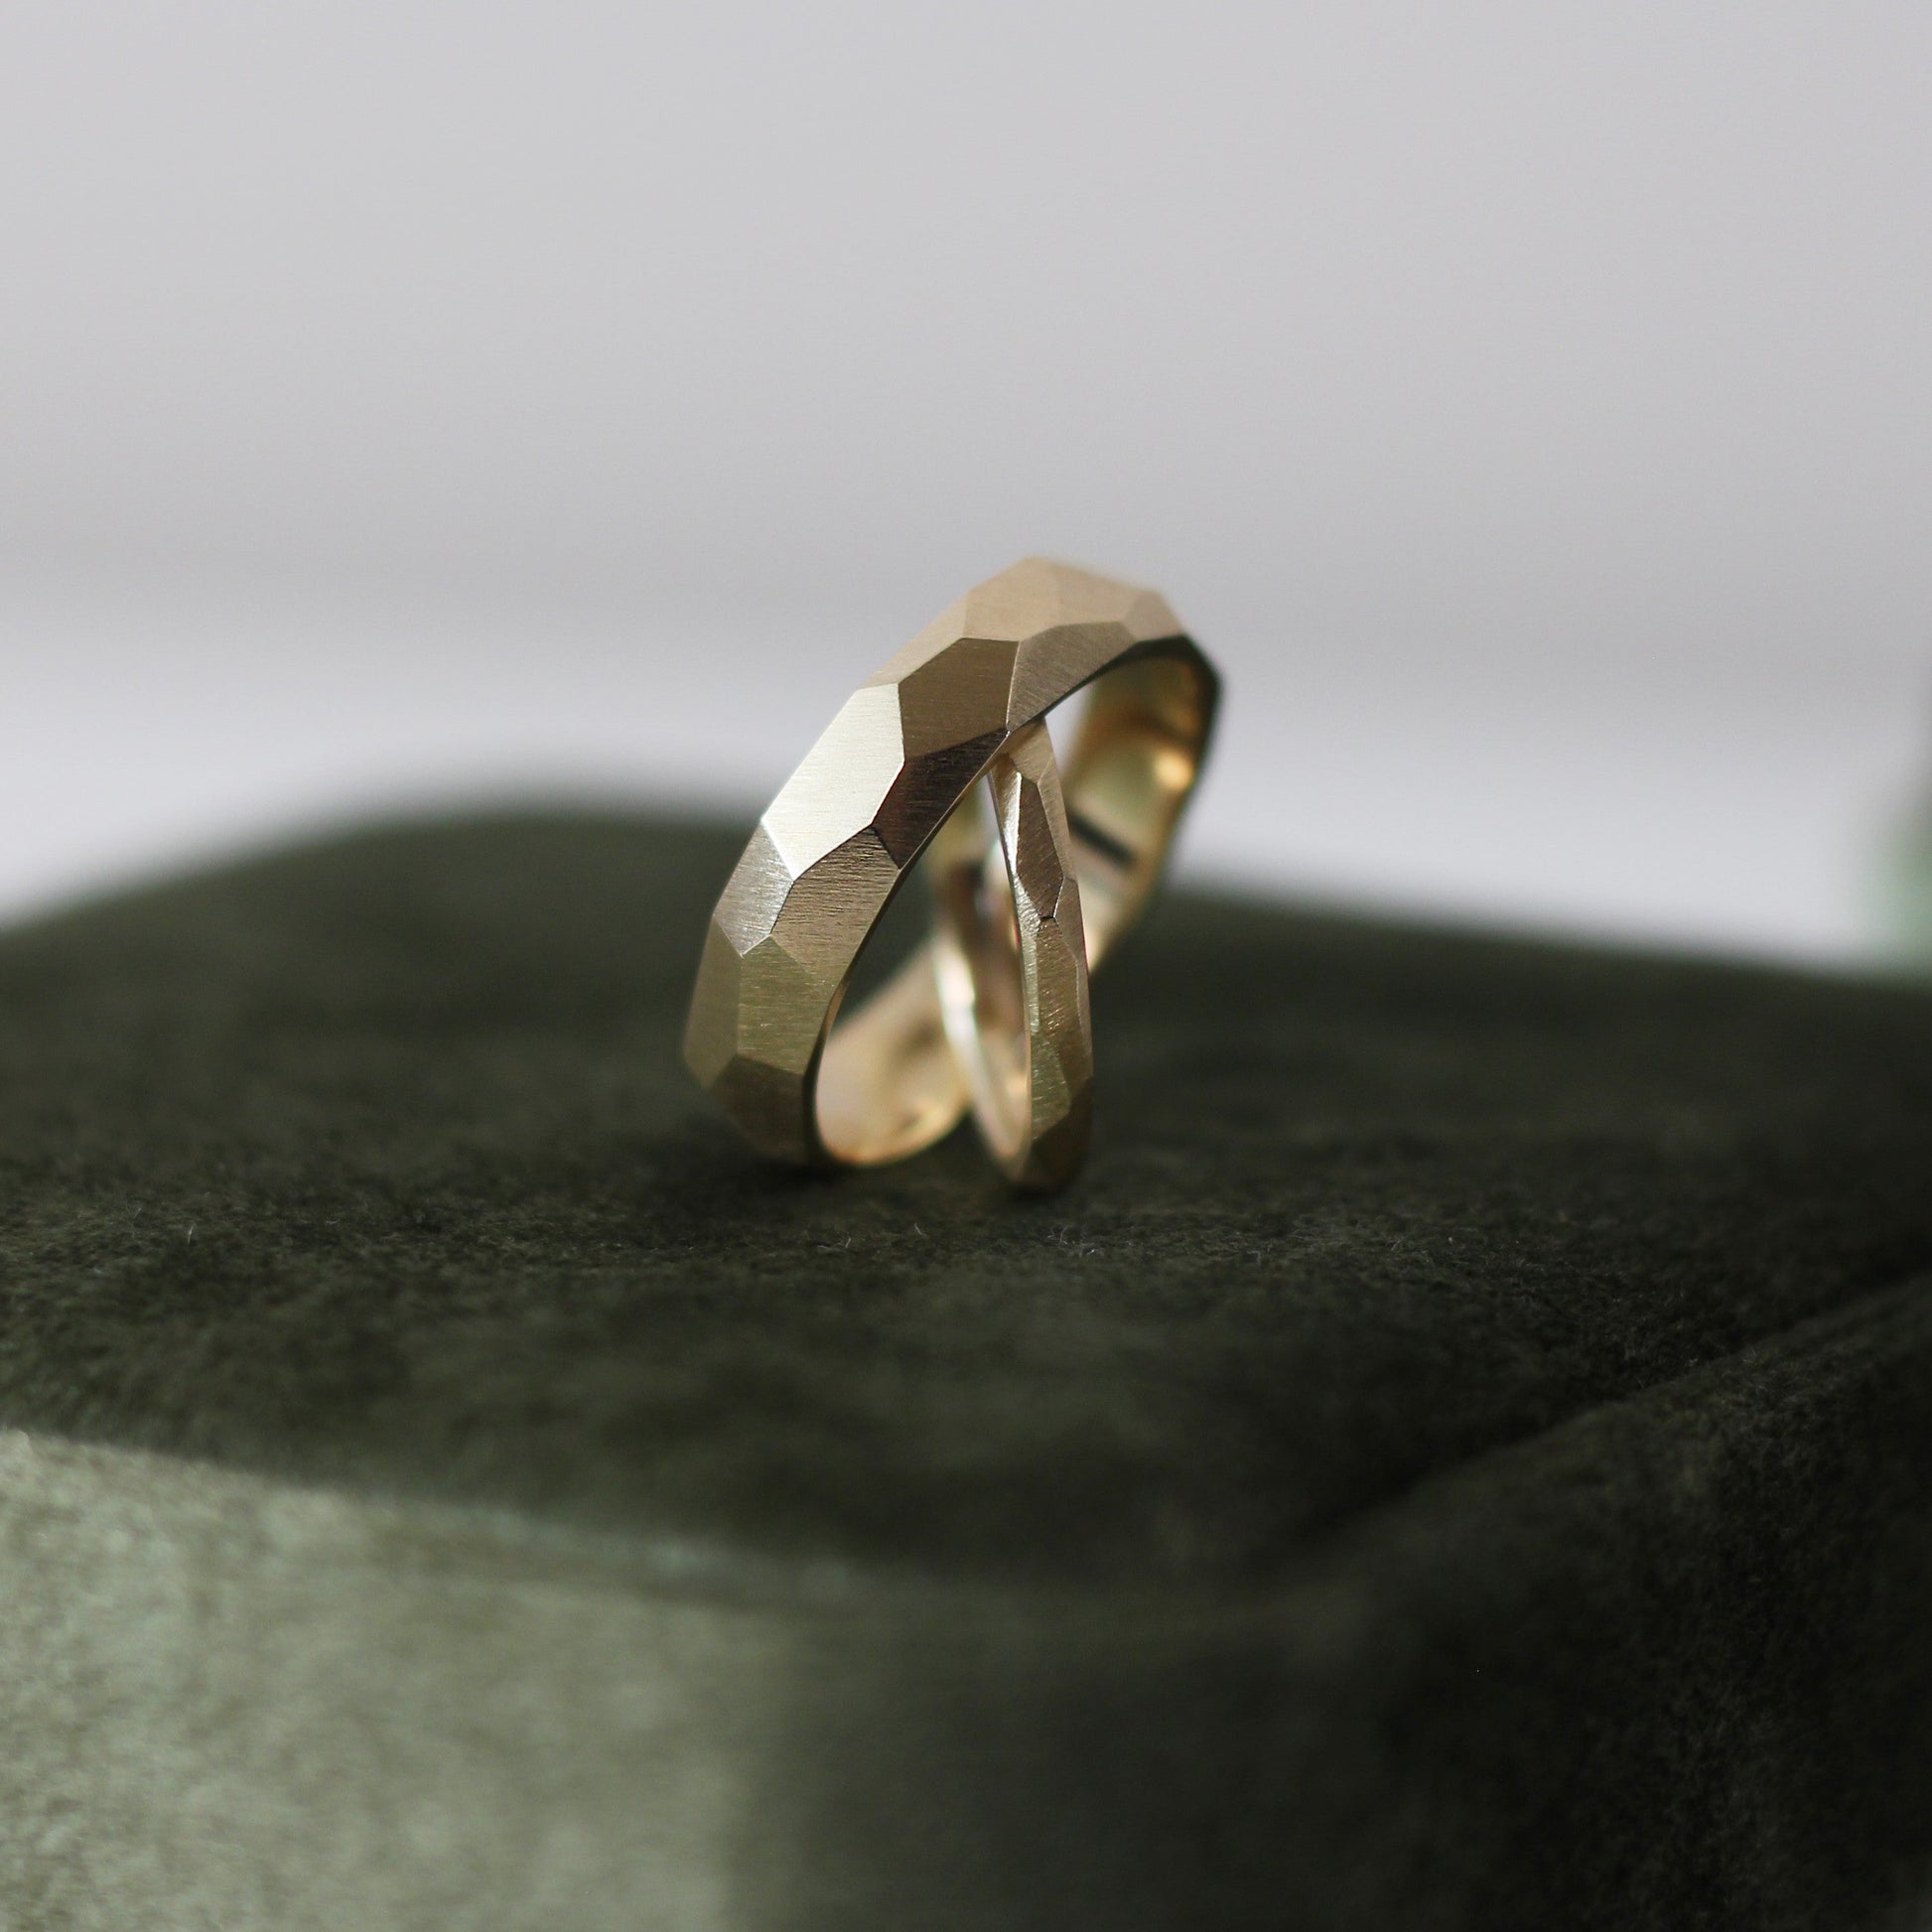 Geometric Faceted Ring - 9ct/18ct Gold, 2mm and 5mm width on a velvet box - Aisling Chou Studio